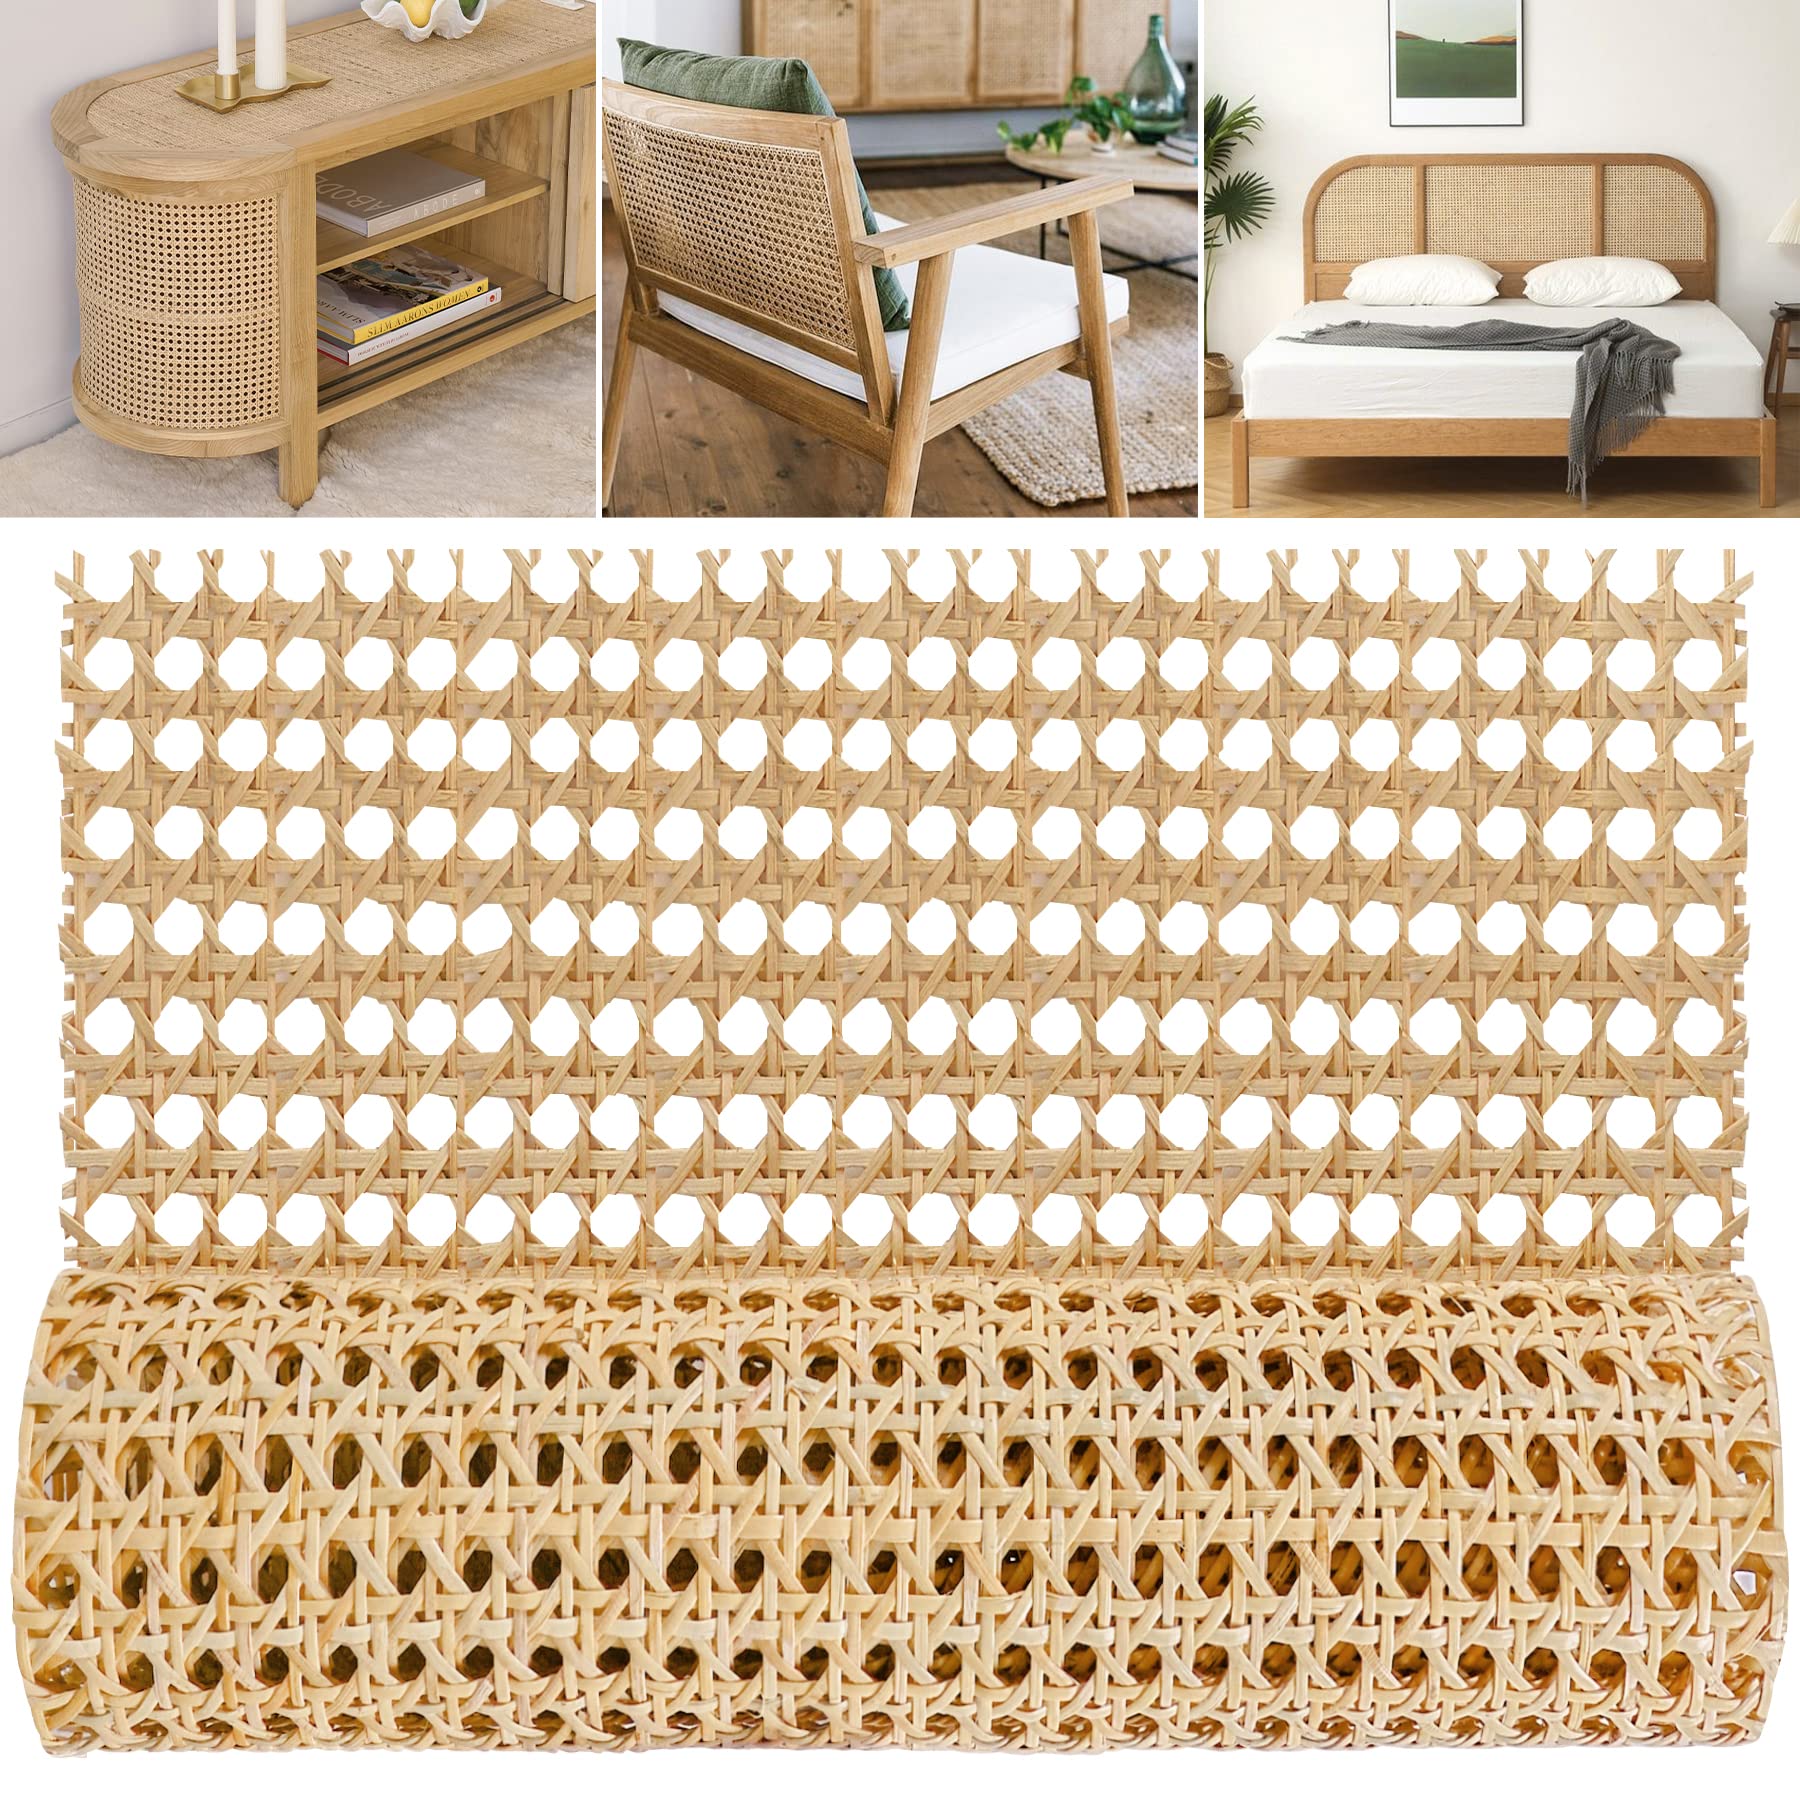 Caning Material 24 in Wide, Natural Rattan Cane Webbing Roll, Pre - Woven  Open Mesh Cane, Cane Webbing Sheets for Chairs, Cabinets, Caning Furniture